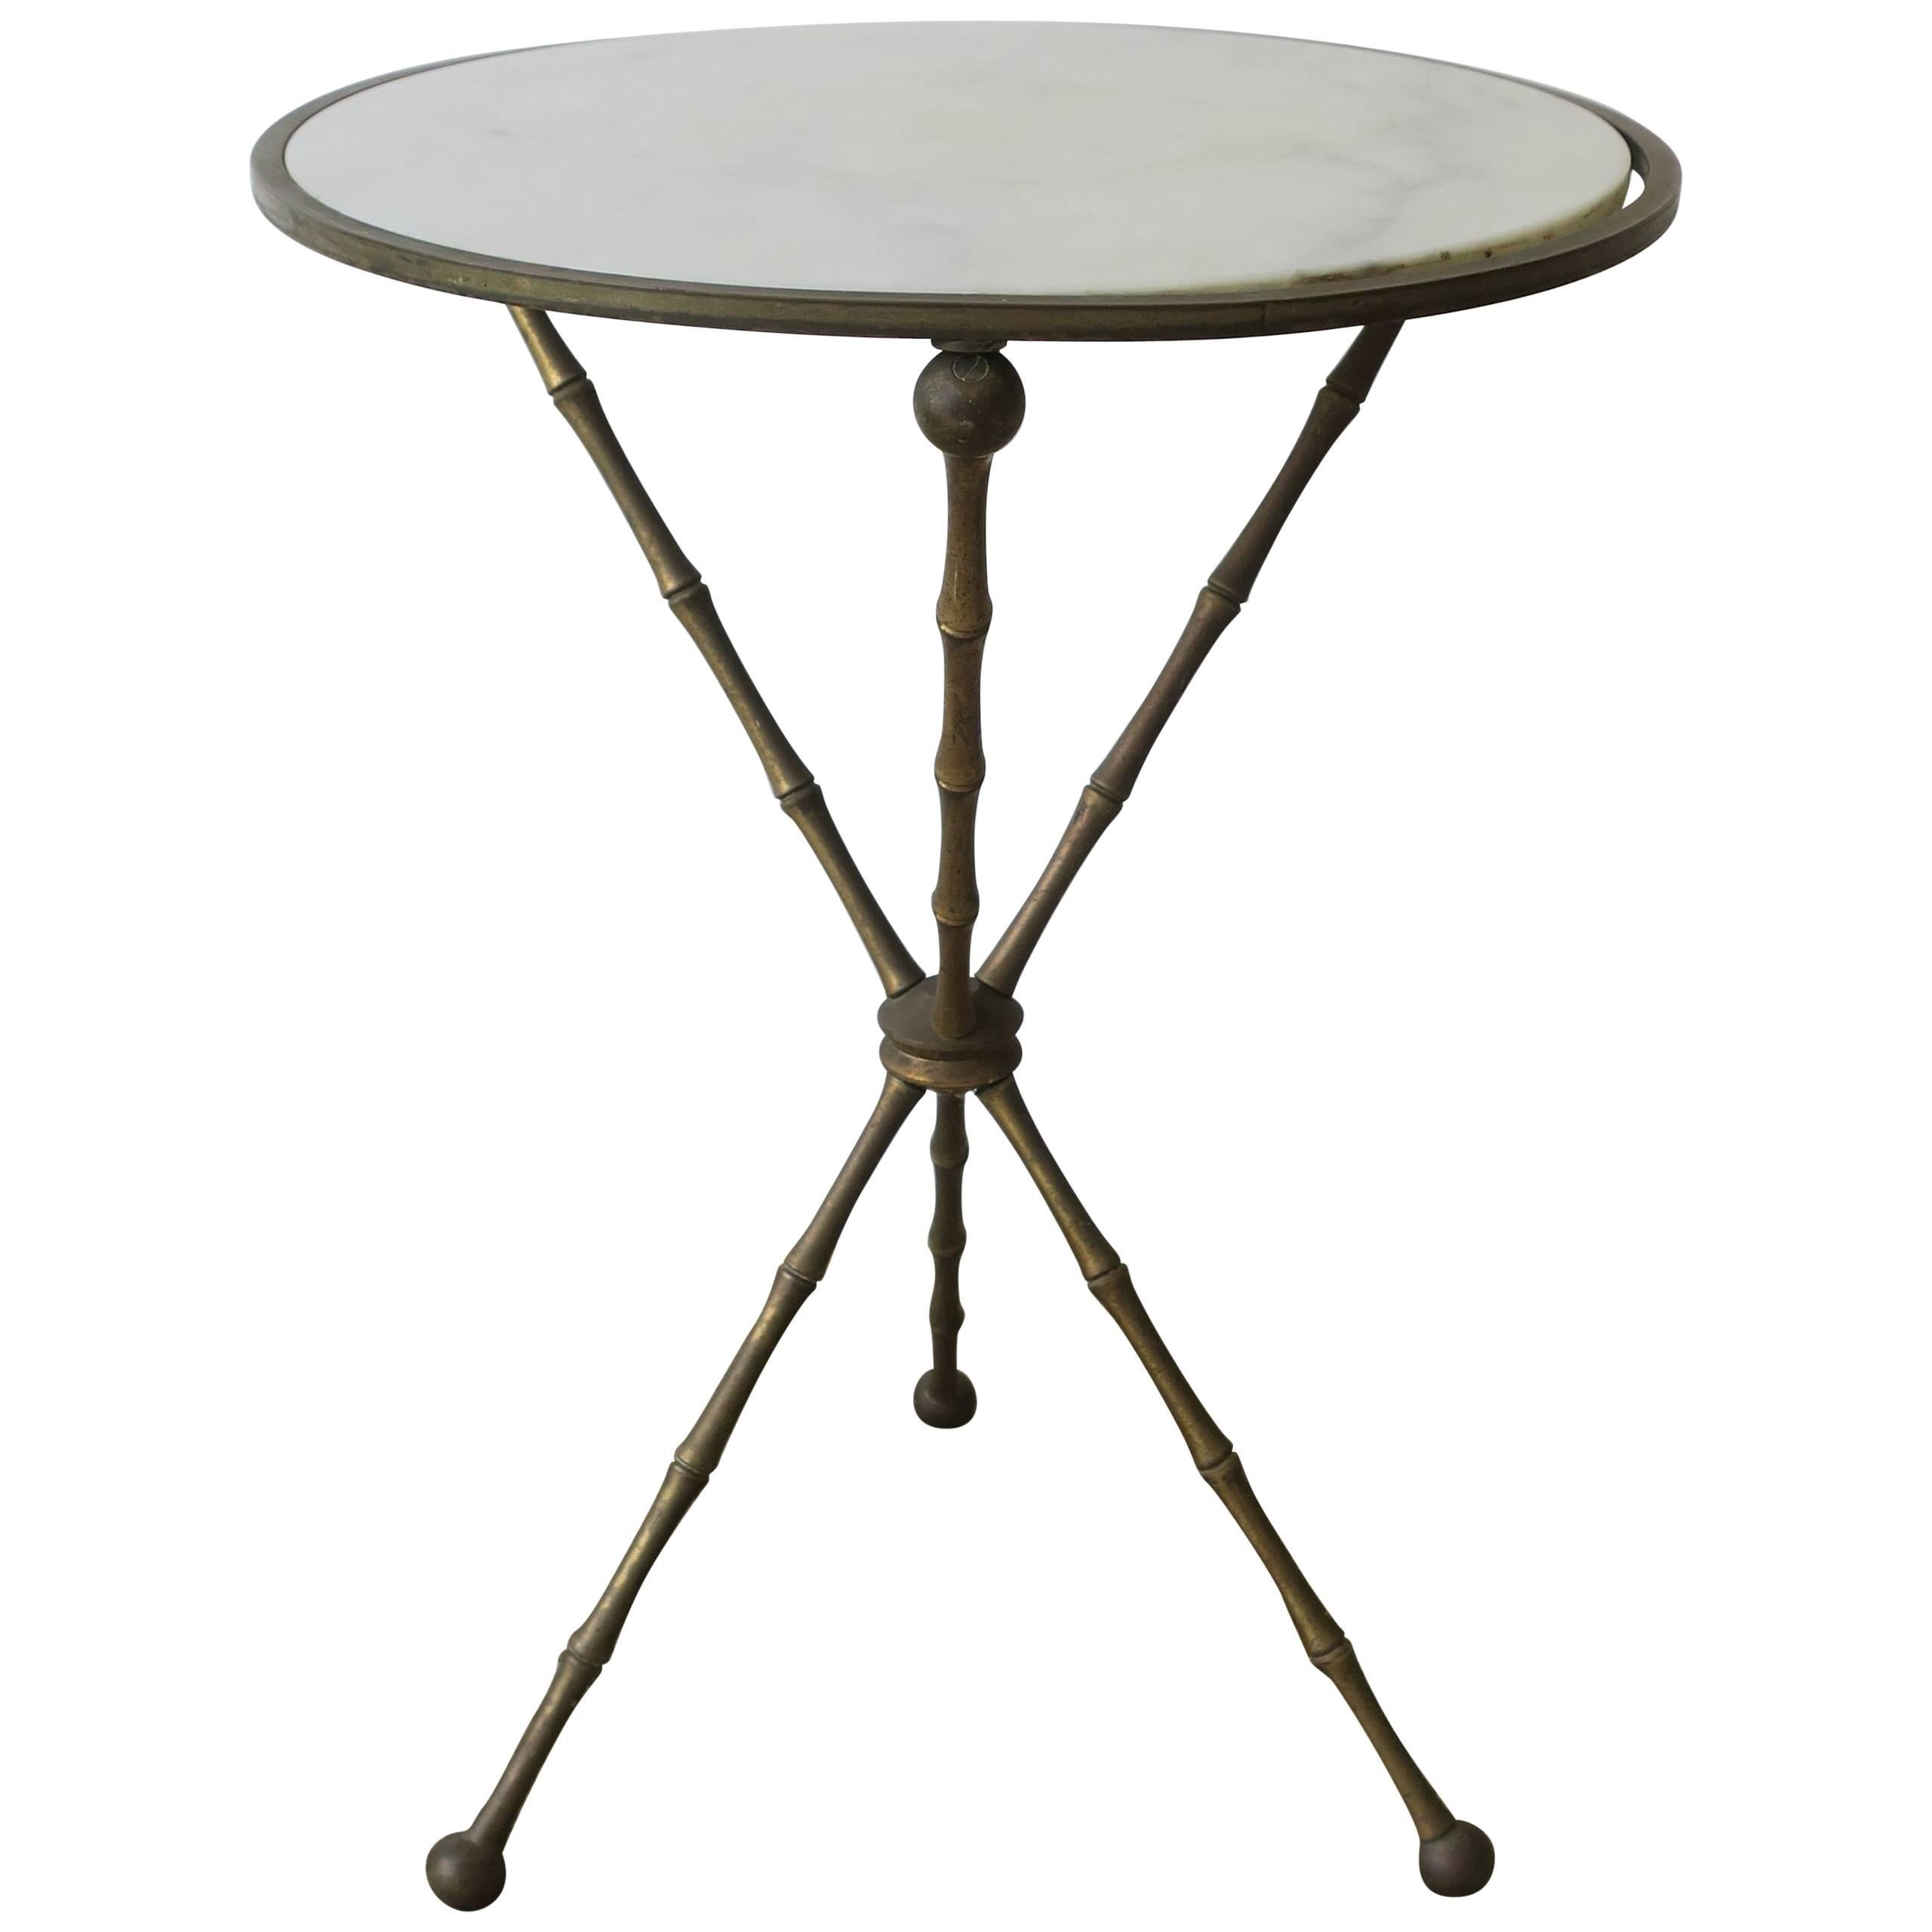 Midcentury Italian Marble and Brass Tripod Side Table, Italy, 1960s